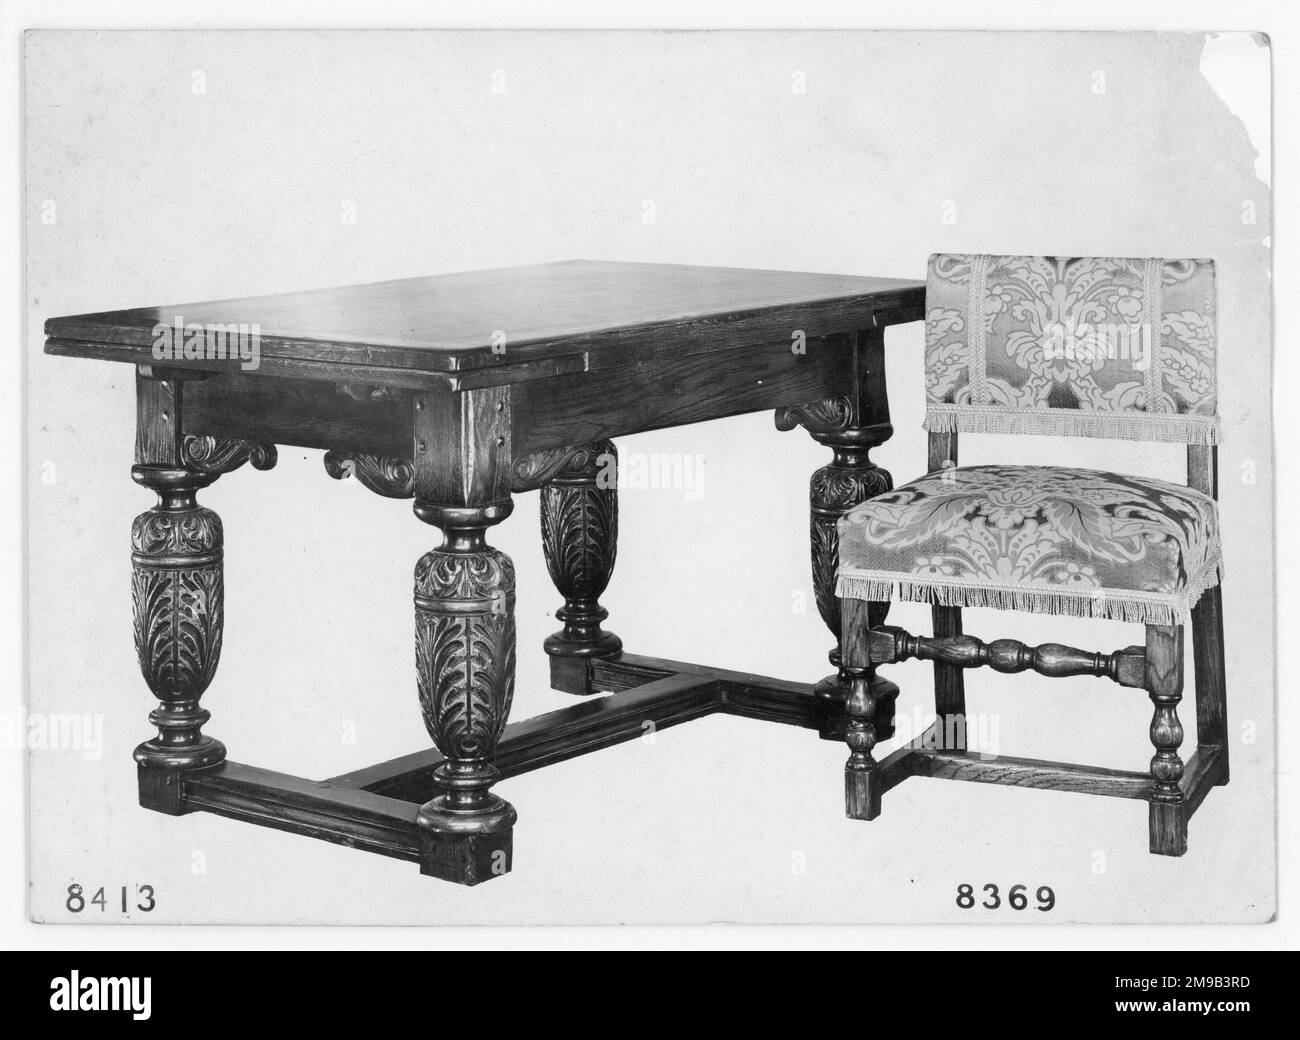 Table and chair from a furniture showroom catalogue, numbered as number 8413 and number 8369, respectively. Stock Photo